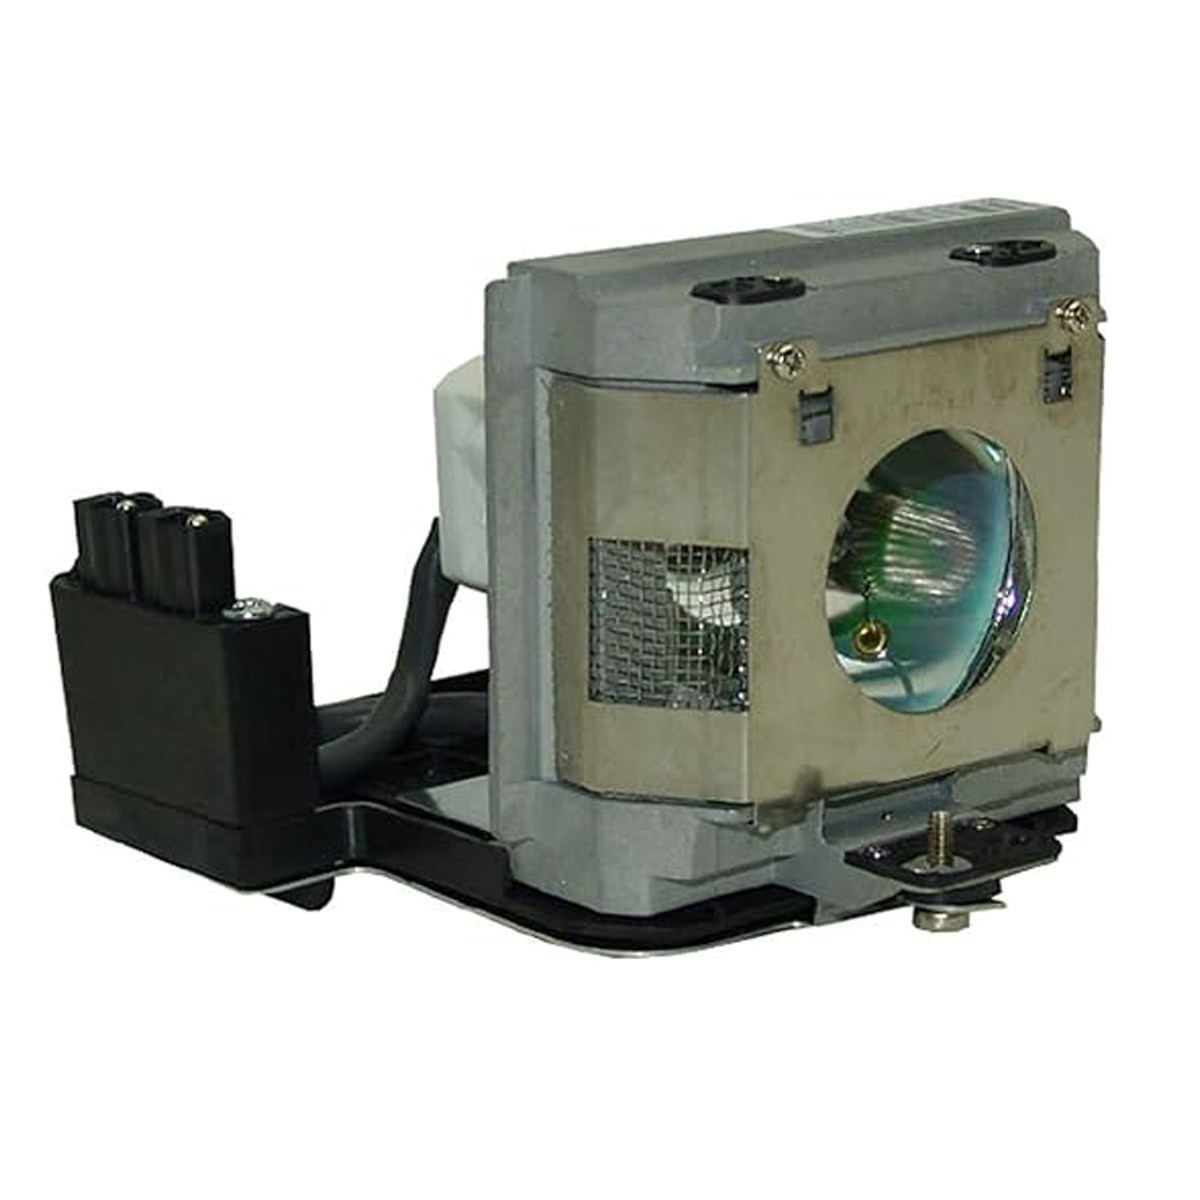 Replacement Projector lamp AH-35001 For EIKI EIP-3500